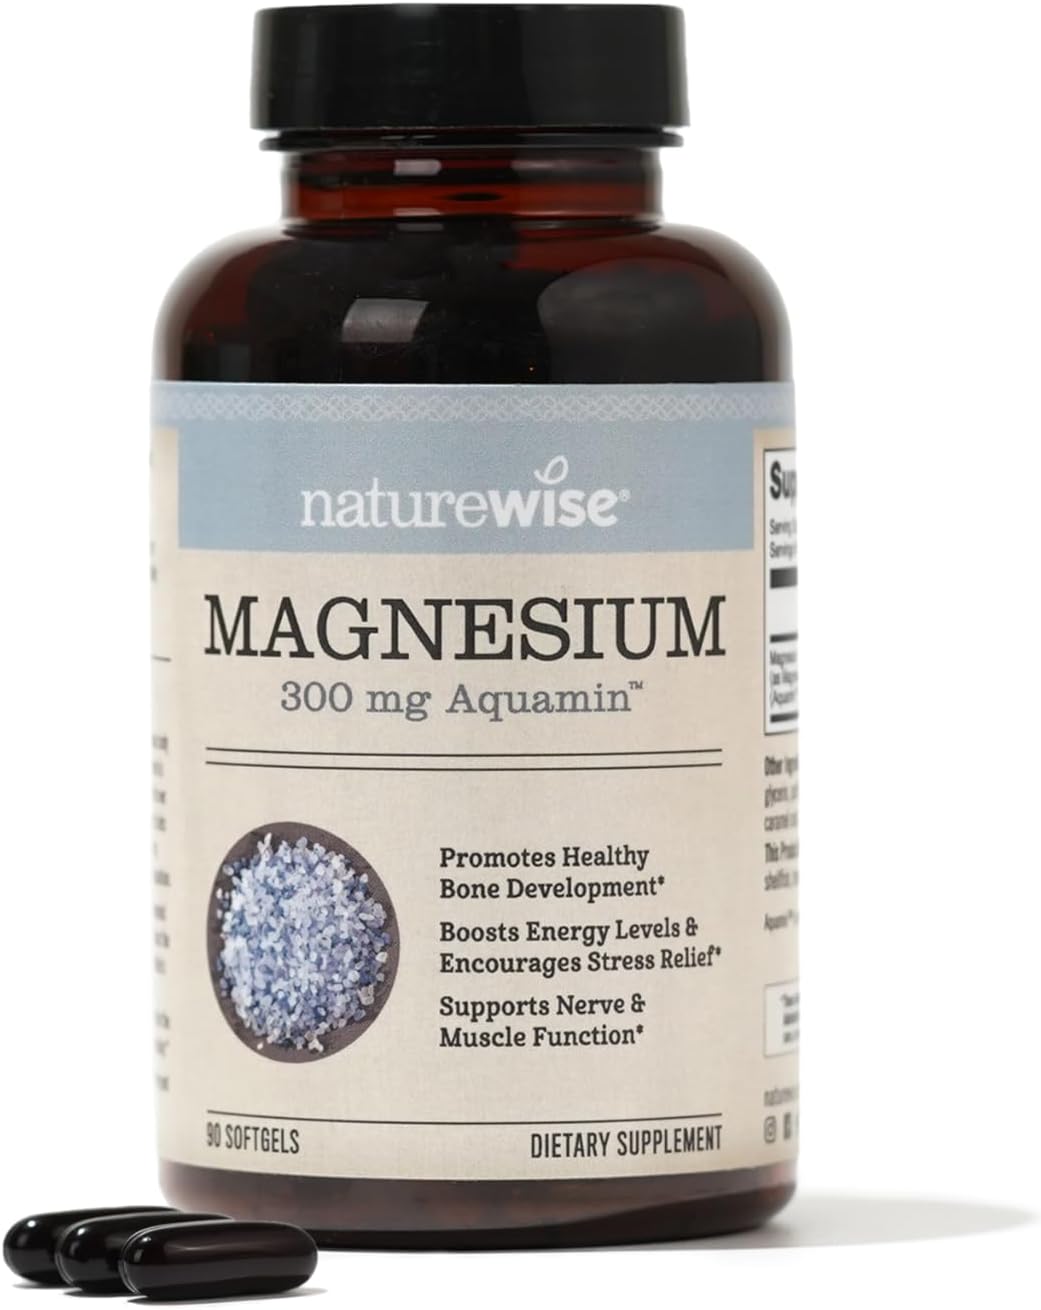 Naturewise Magnesium Essential Mineral Supplement for Optimal Health, Wellness, and Mood Support(90 Softgels)